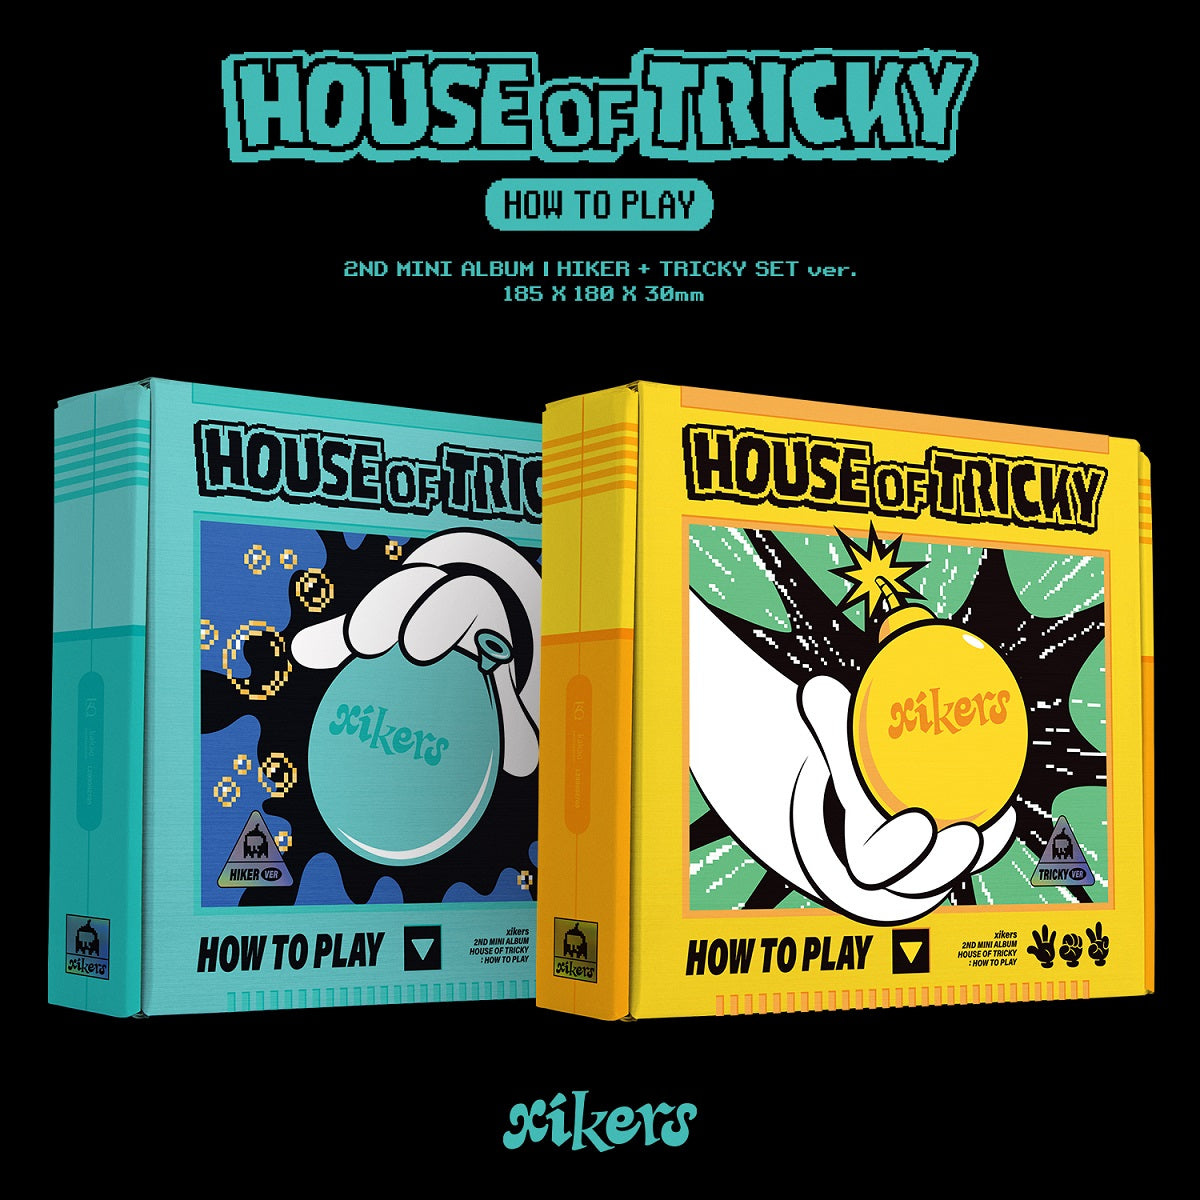 XIKERS 2ND MINI ALBUM 'HOUSE OF TRICKY : HOW TO PLAY' SET COVER